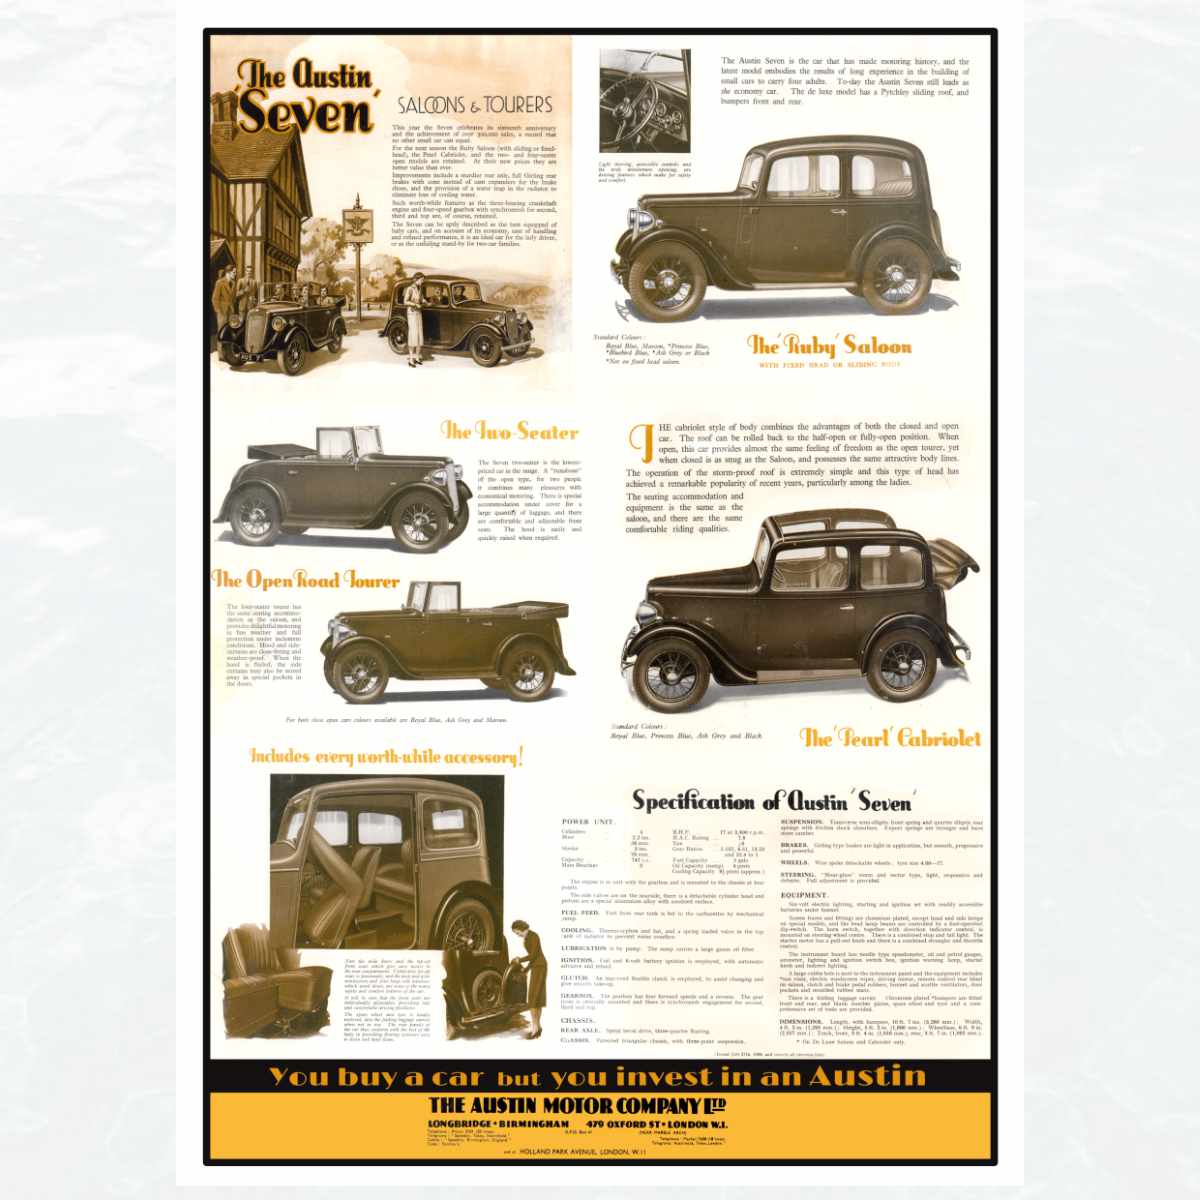 1938 Austin Seven poster reproduced from the original sales brochure